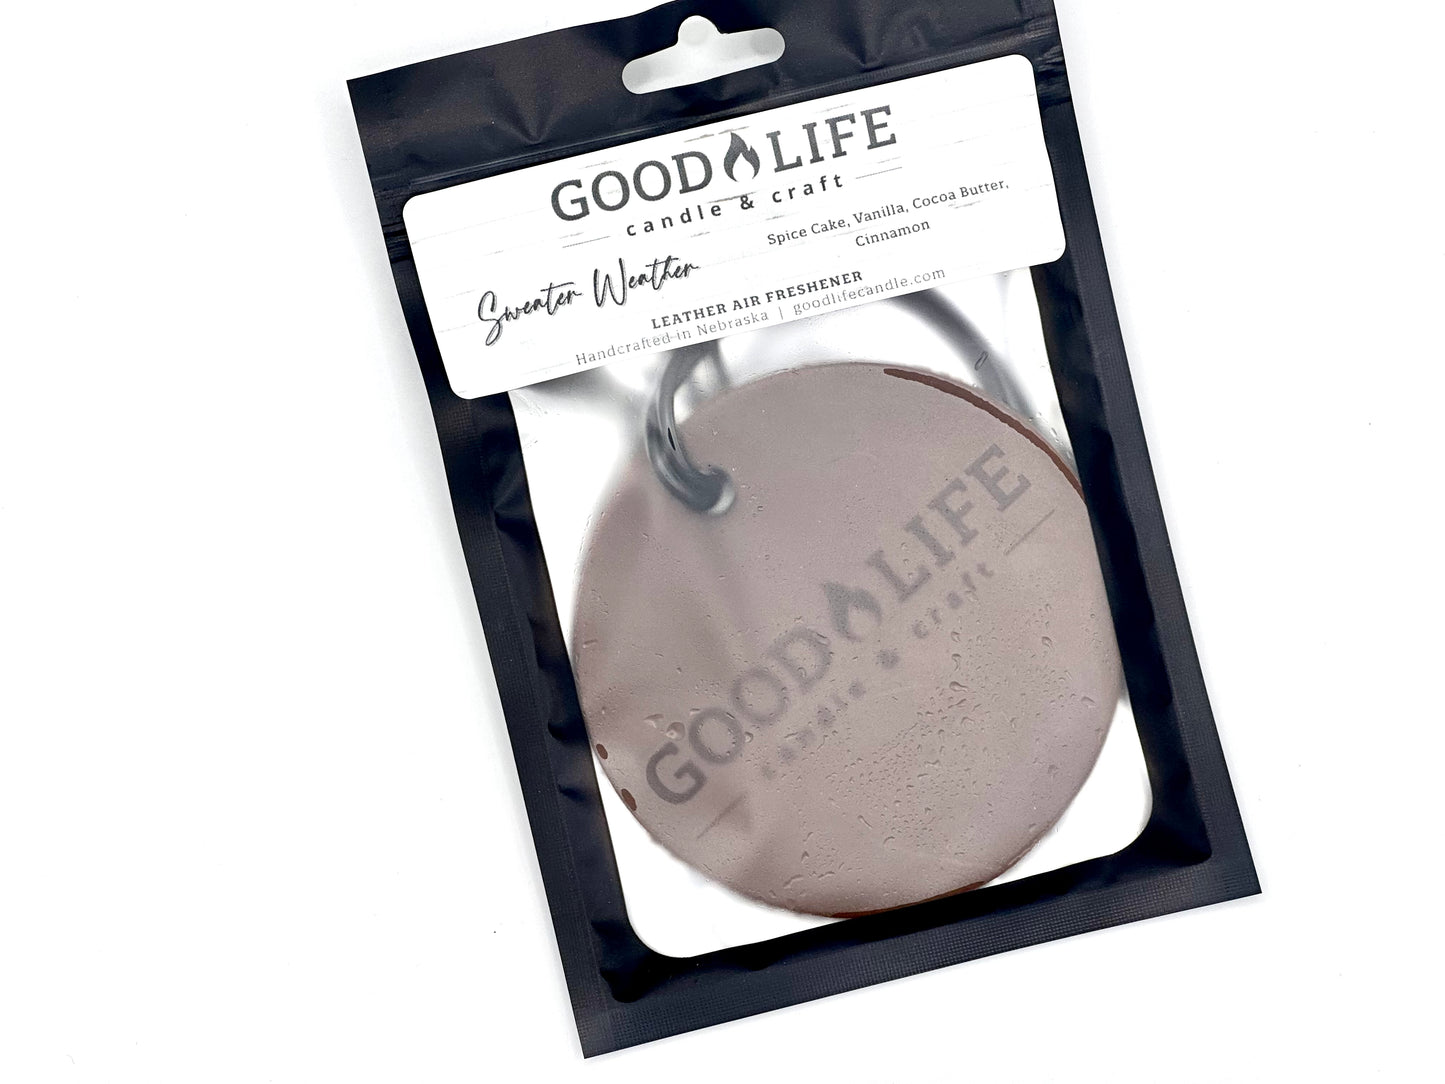 Sweater Weather Scented Leather Air Freshener